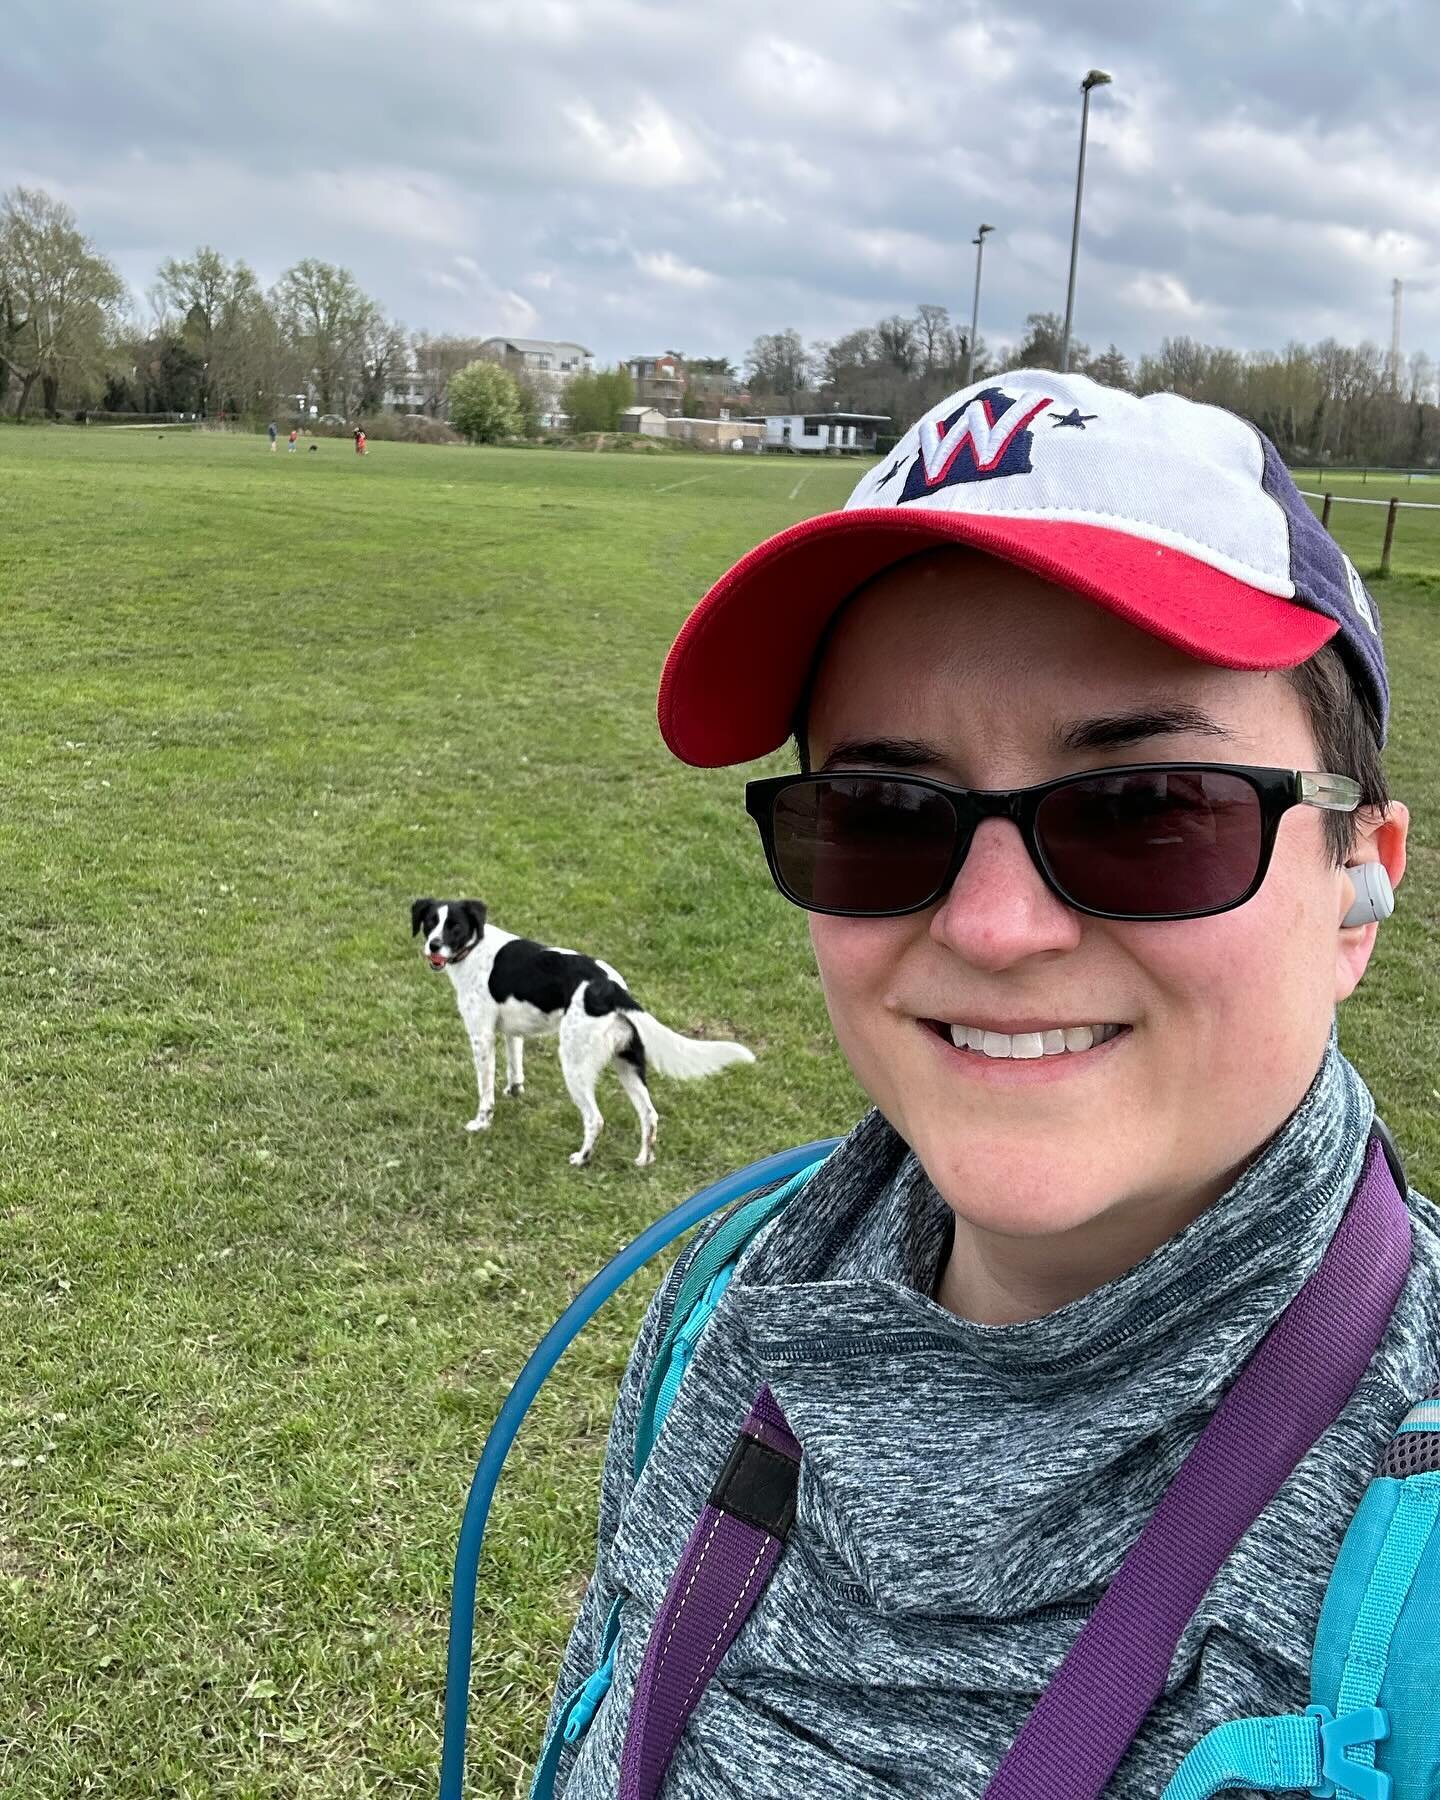 I didn&rsquo;t feel like leaving the house today. But she needed to walk, so out I went. 

I&rsquo;m glad I did. It took me a while to warm up, and I had to keep telling myself to keep going. 

Some days are like that. Even when it&rsquo;s sunny and 